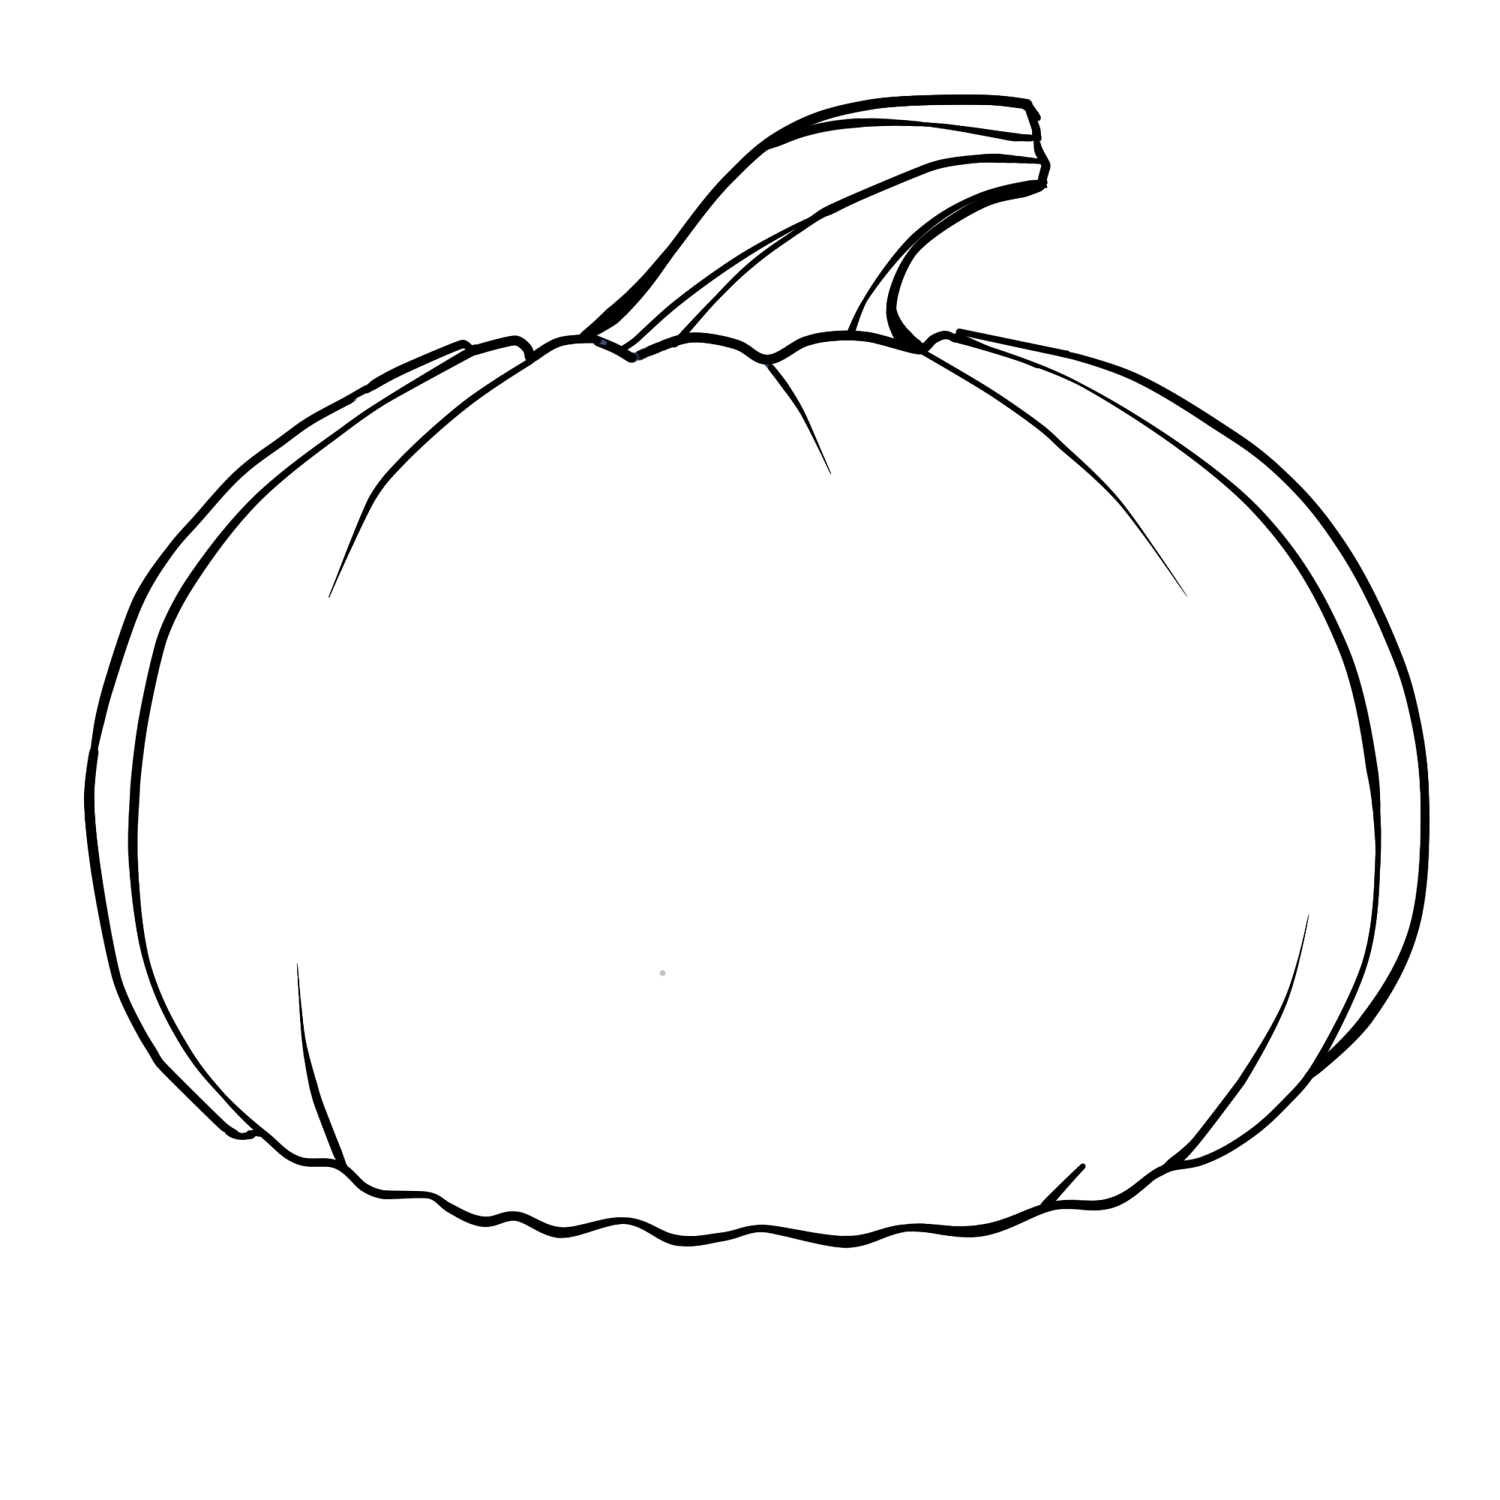 Pumpkin Outline Printable | Clipart library - Free Clipart Images